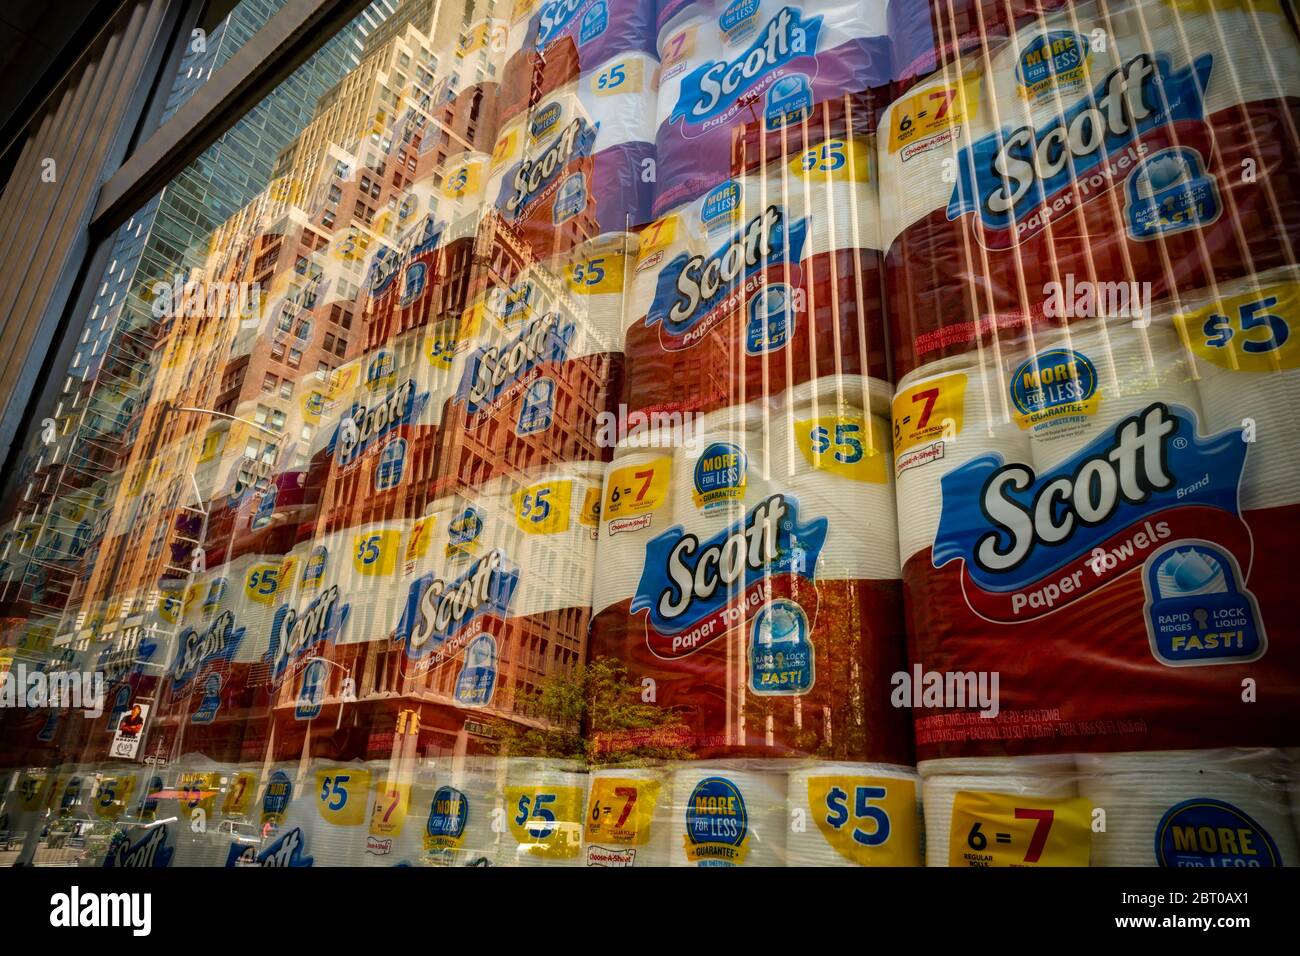 A selection of Kimberly-Clark’s Scott brand paper products displayed in the window of a store in New York on Thursday, May 21, 2020. (© Richard B. Levine) Stock Photo